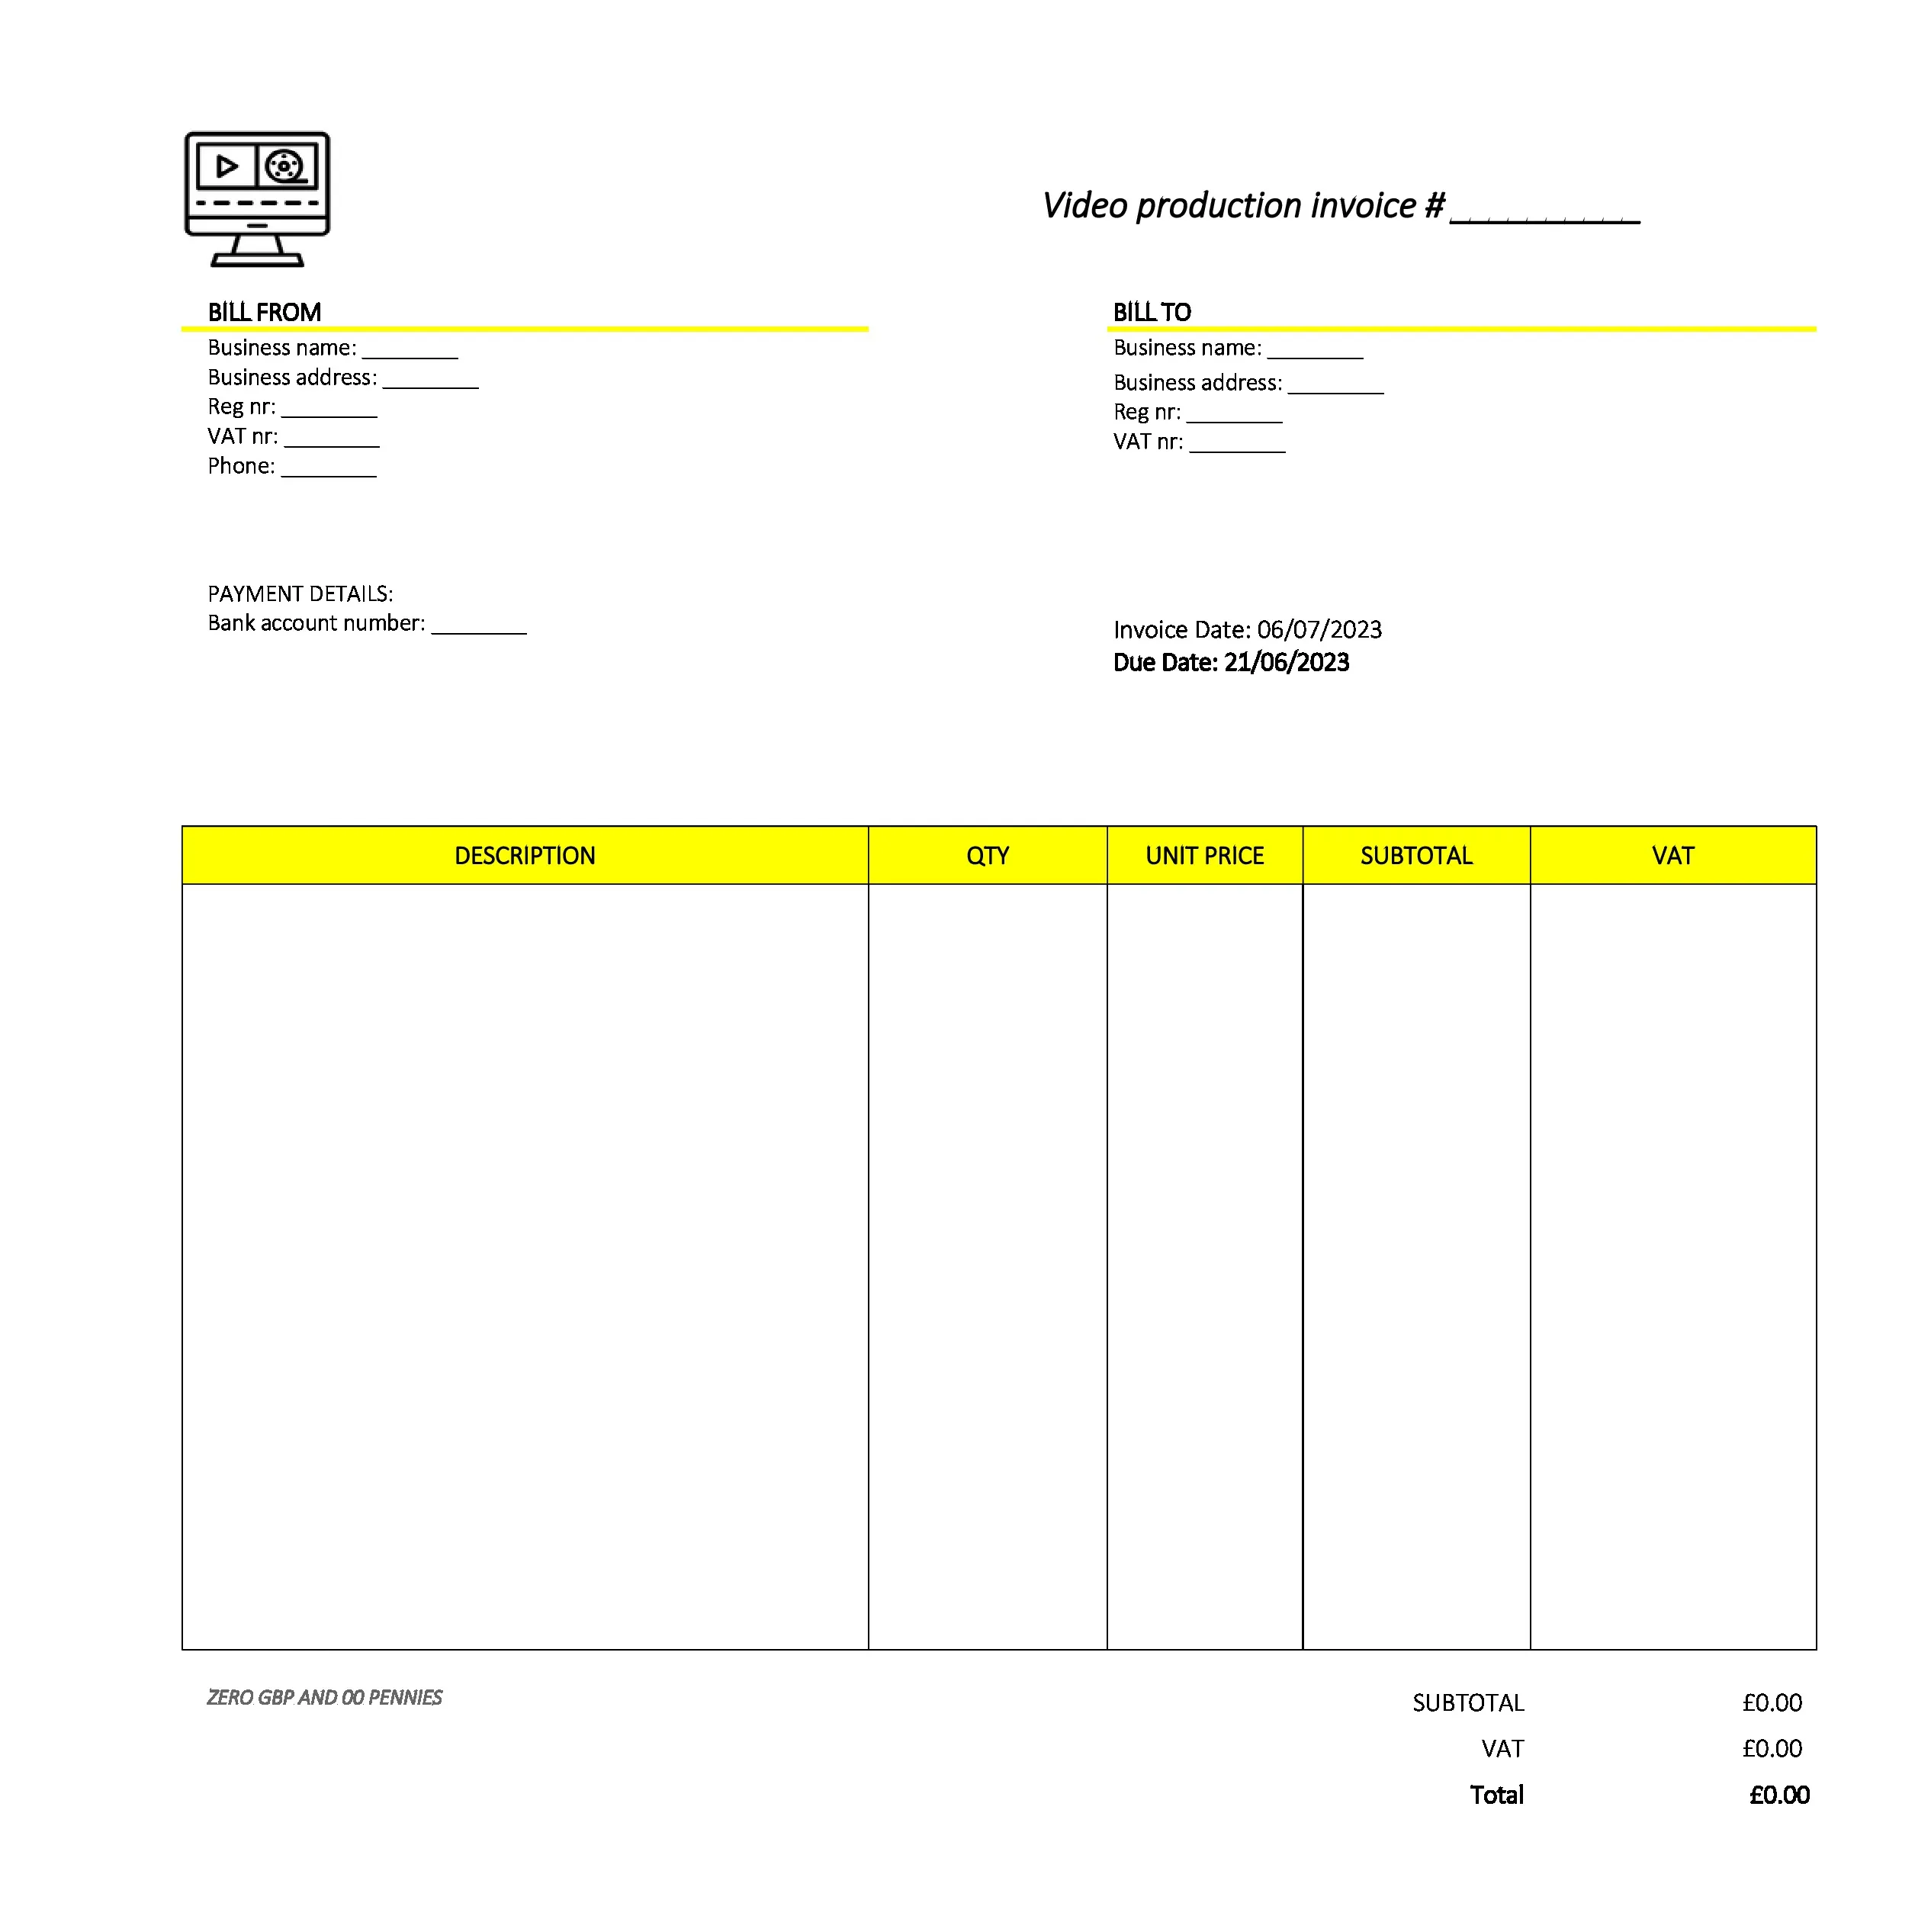 formal video production invoice template UK Excel / Google sheets